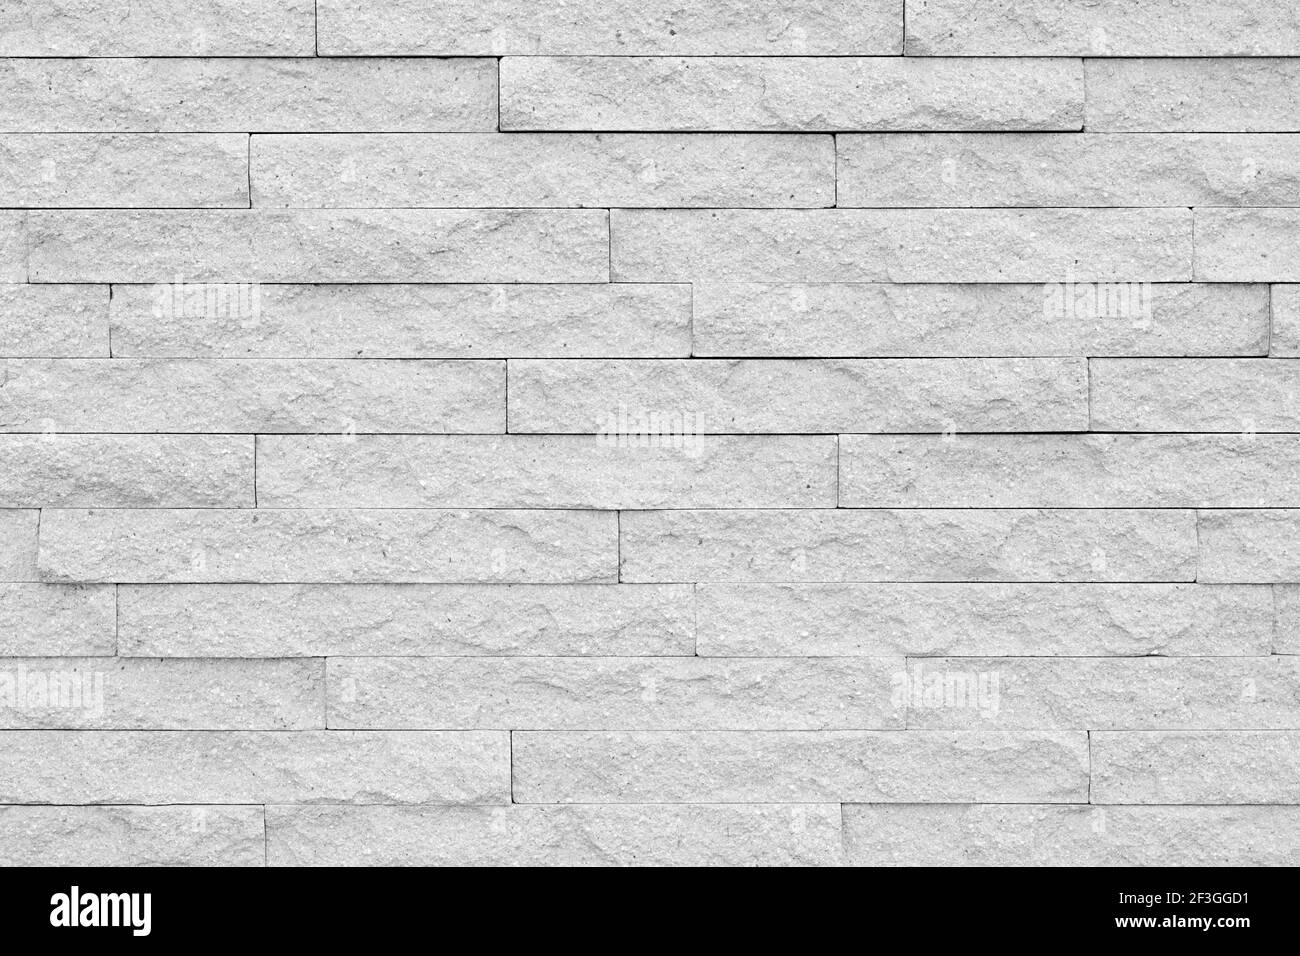 Sandstone brick wall texture as background Stock Photo